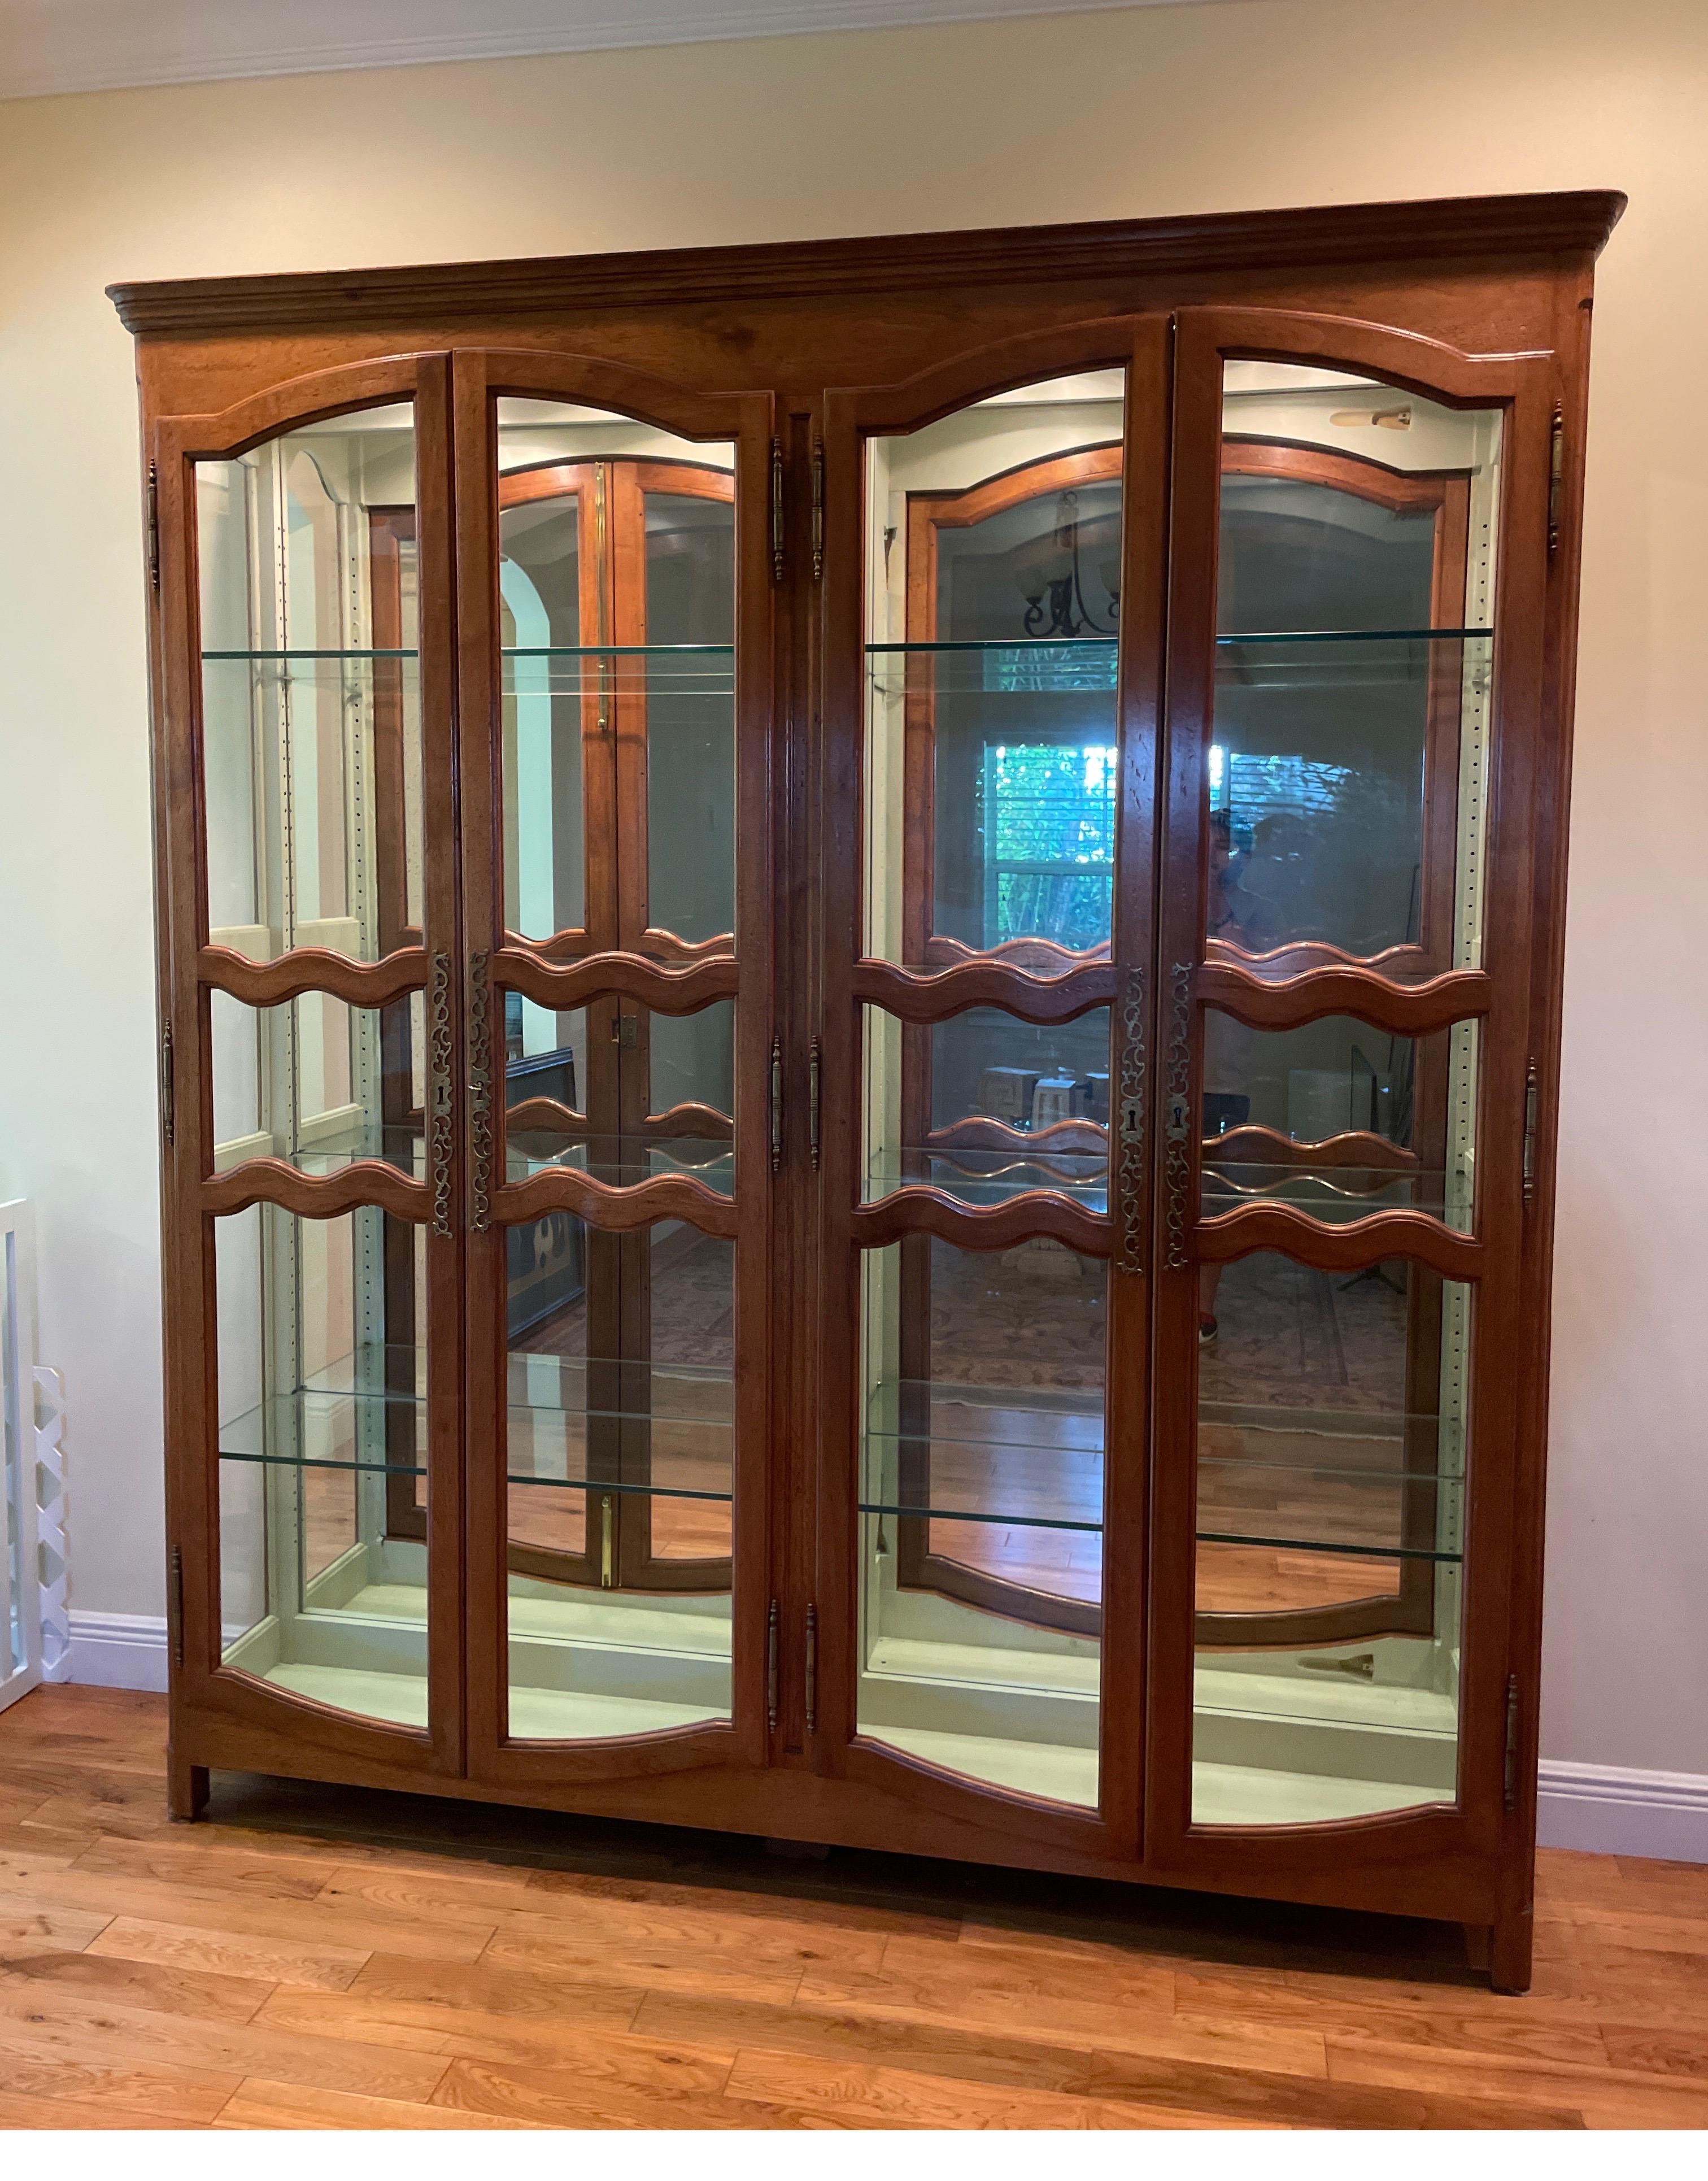 Antique French Bibliotheque / display cabinet. This cabinet comes with adjustable glass shelves and a later mirrored back wall. The four front doors and side panels are fitted with glass.